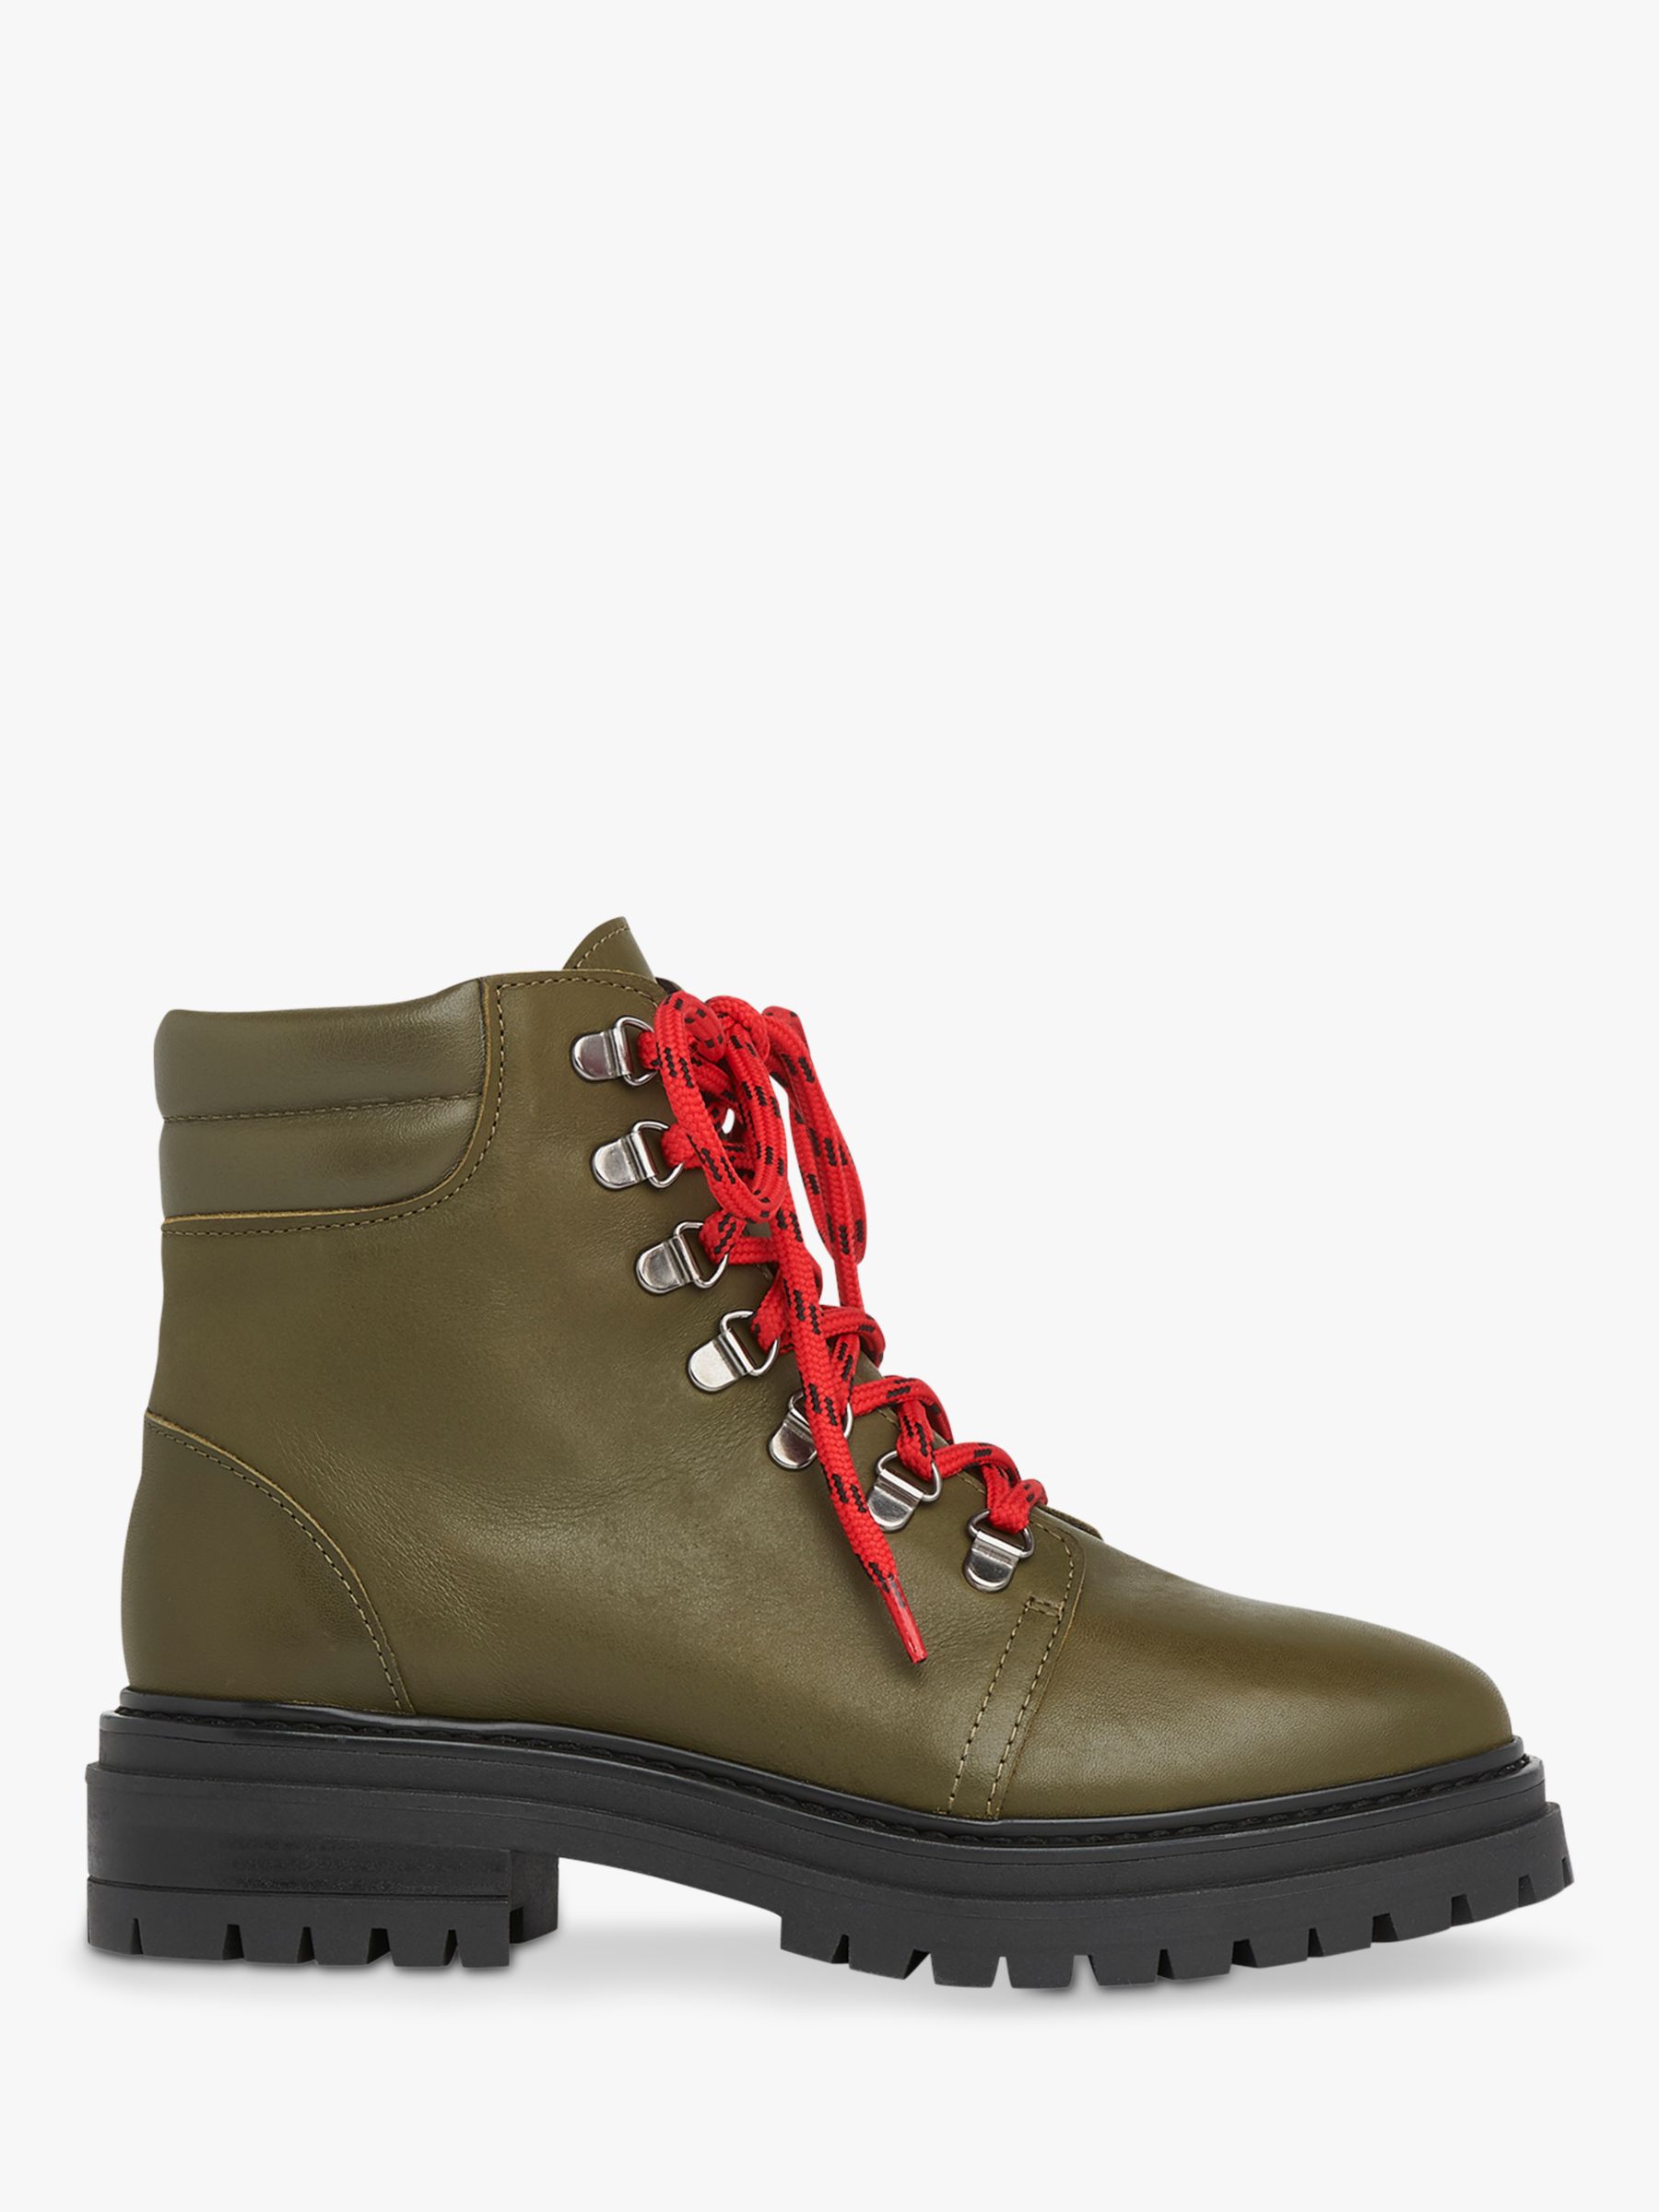 Whistles Amber Leather Lace Up Ankle Boots, Khaki at John Lewis & Partners